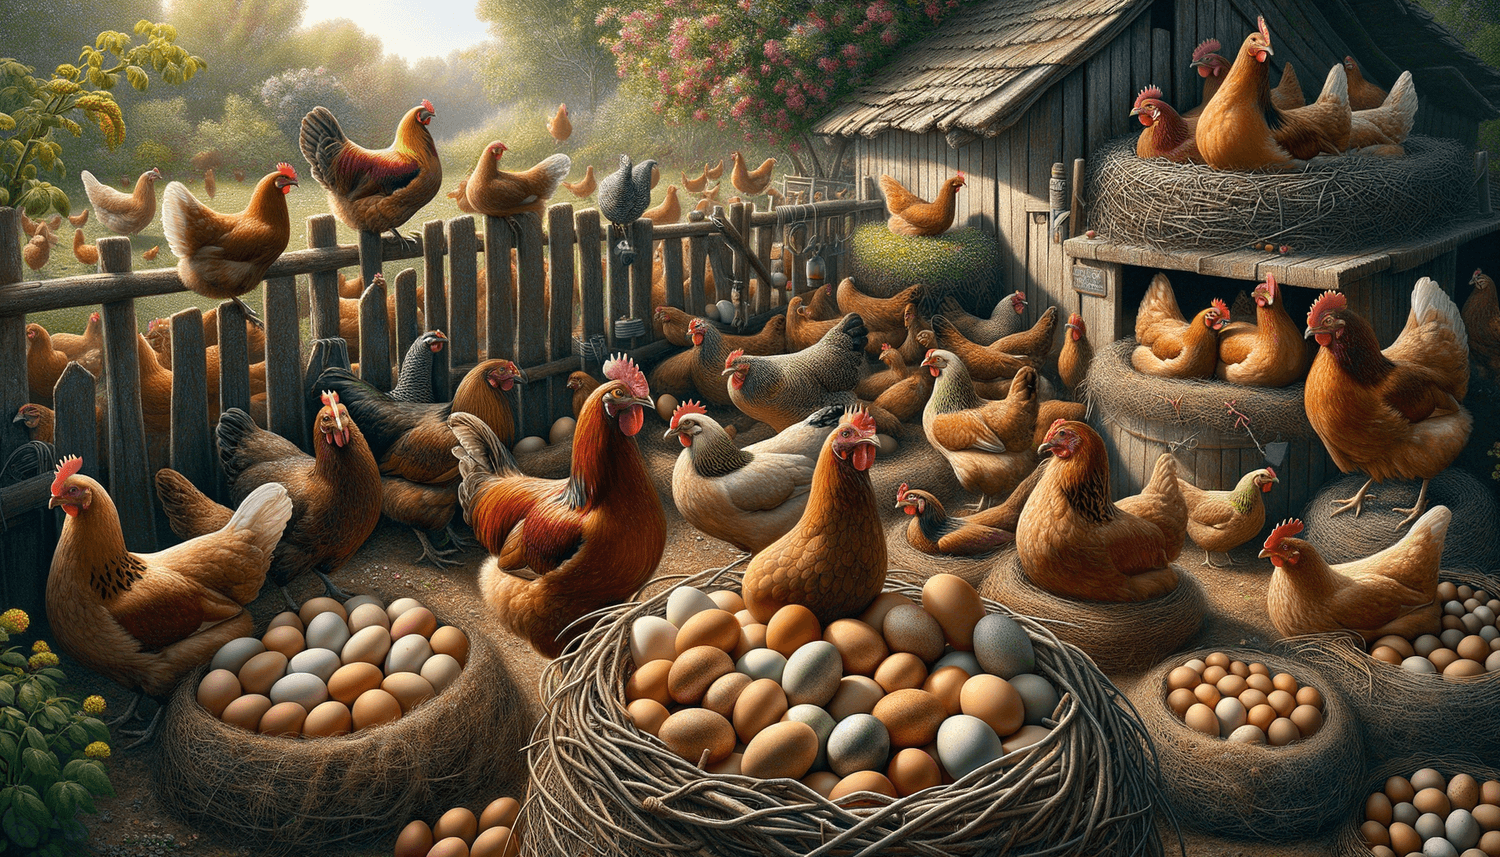 How Many Eggs Do Chickens Lay a Day?